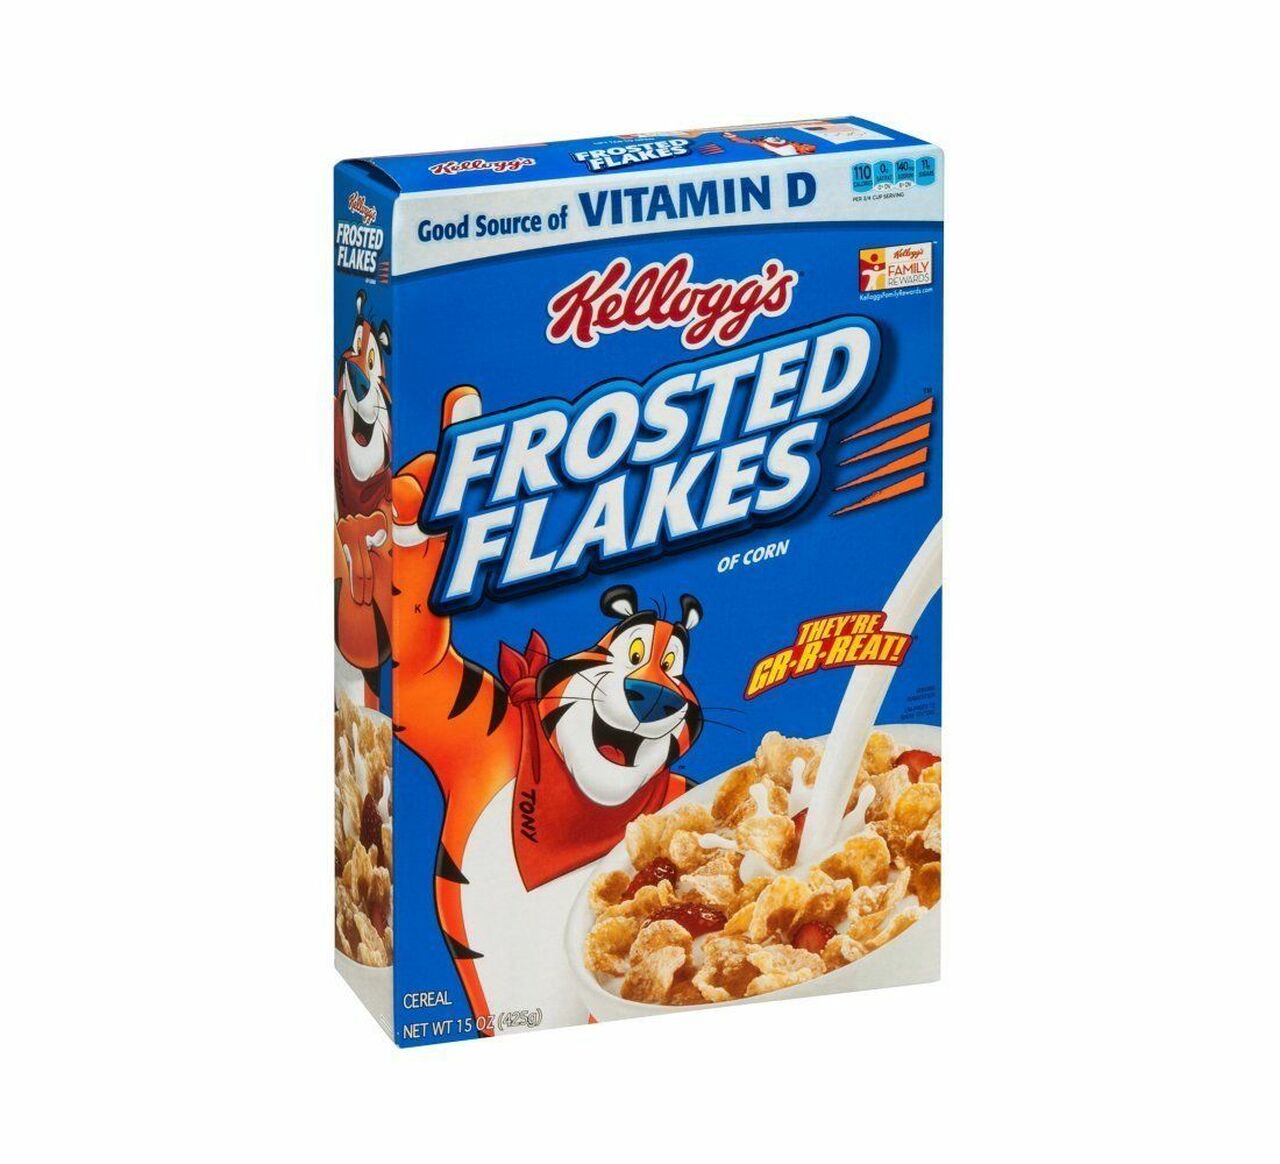 Kellogg's frosted flakes